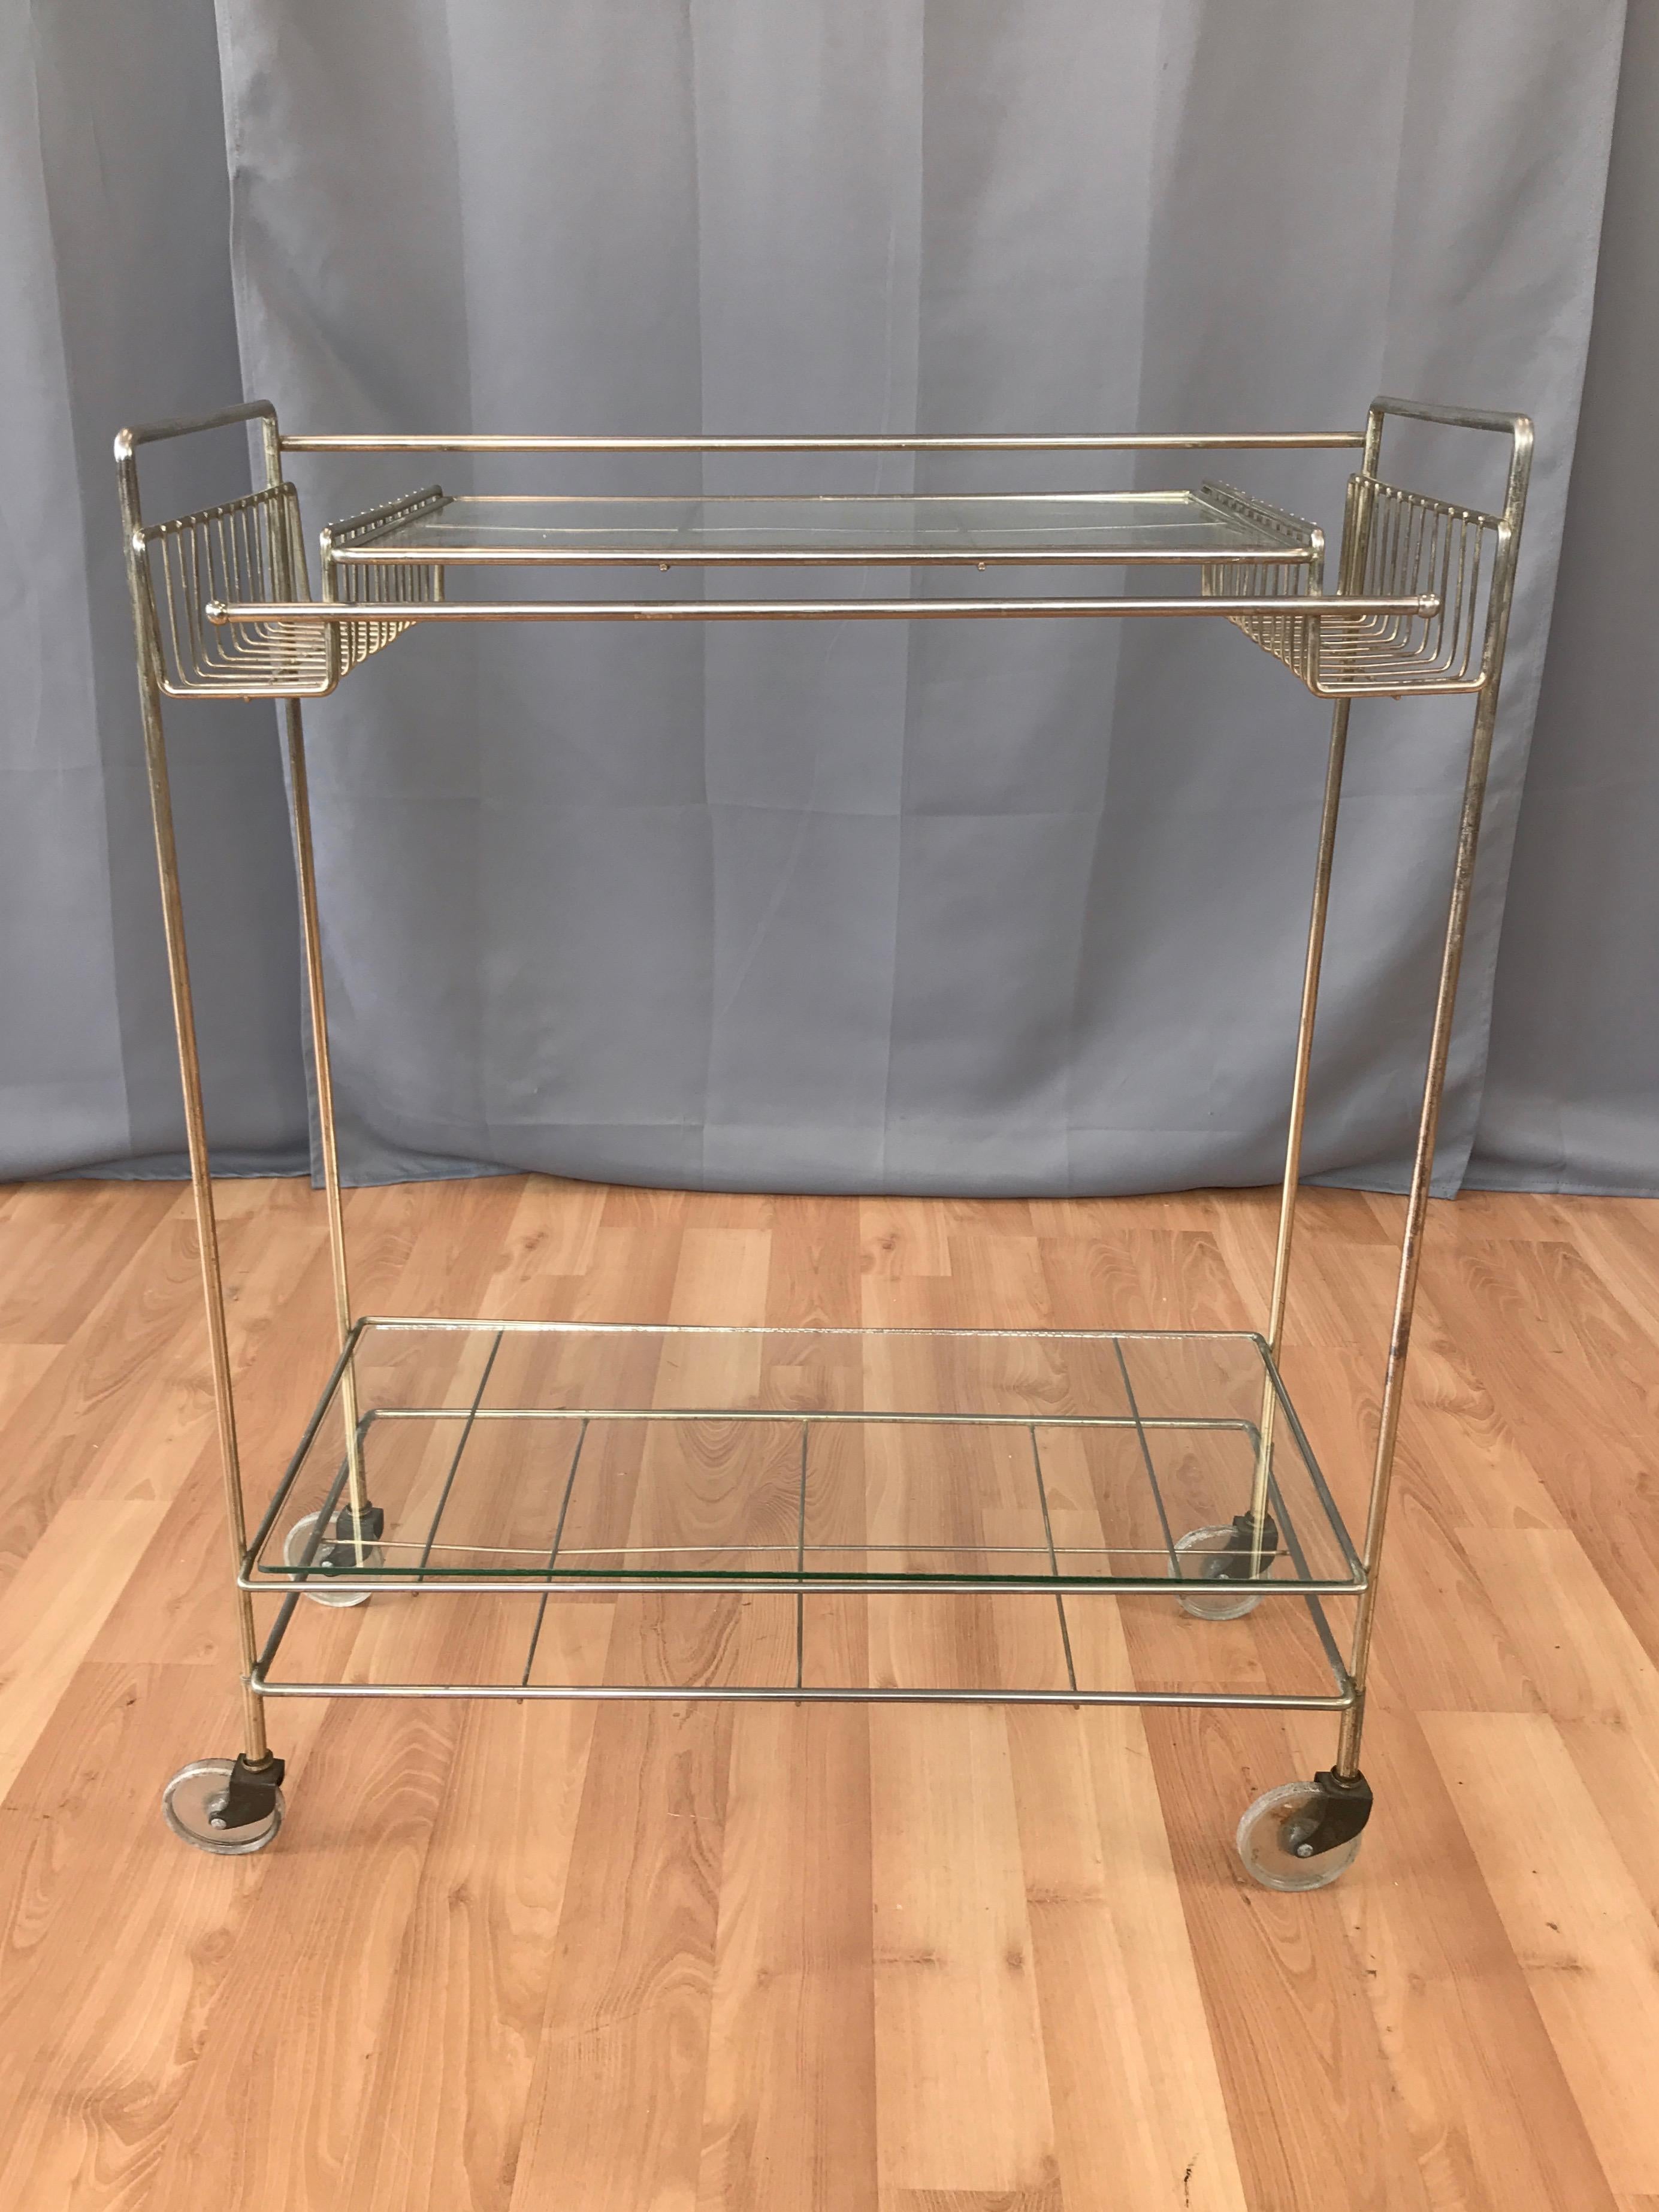 A visually light Mid-Century Modern two-tier metal and glass bar or serving cart from the 1960s.

Minimalist, barely there frame of slender steel rods with a pale champagne finish. (Appears a bit less brassy in person; image 11 is closest.) Baskets